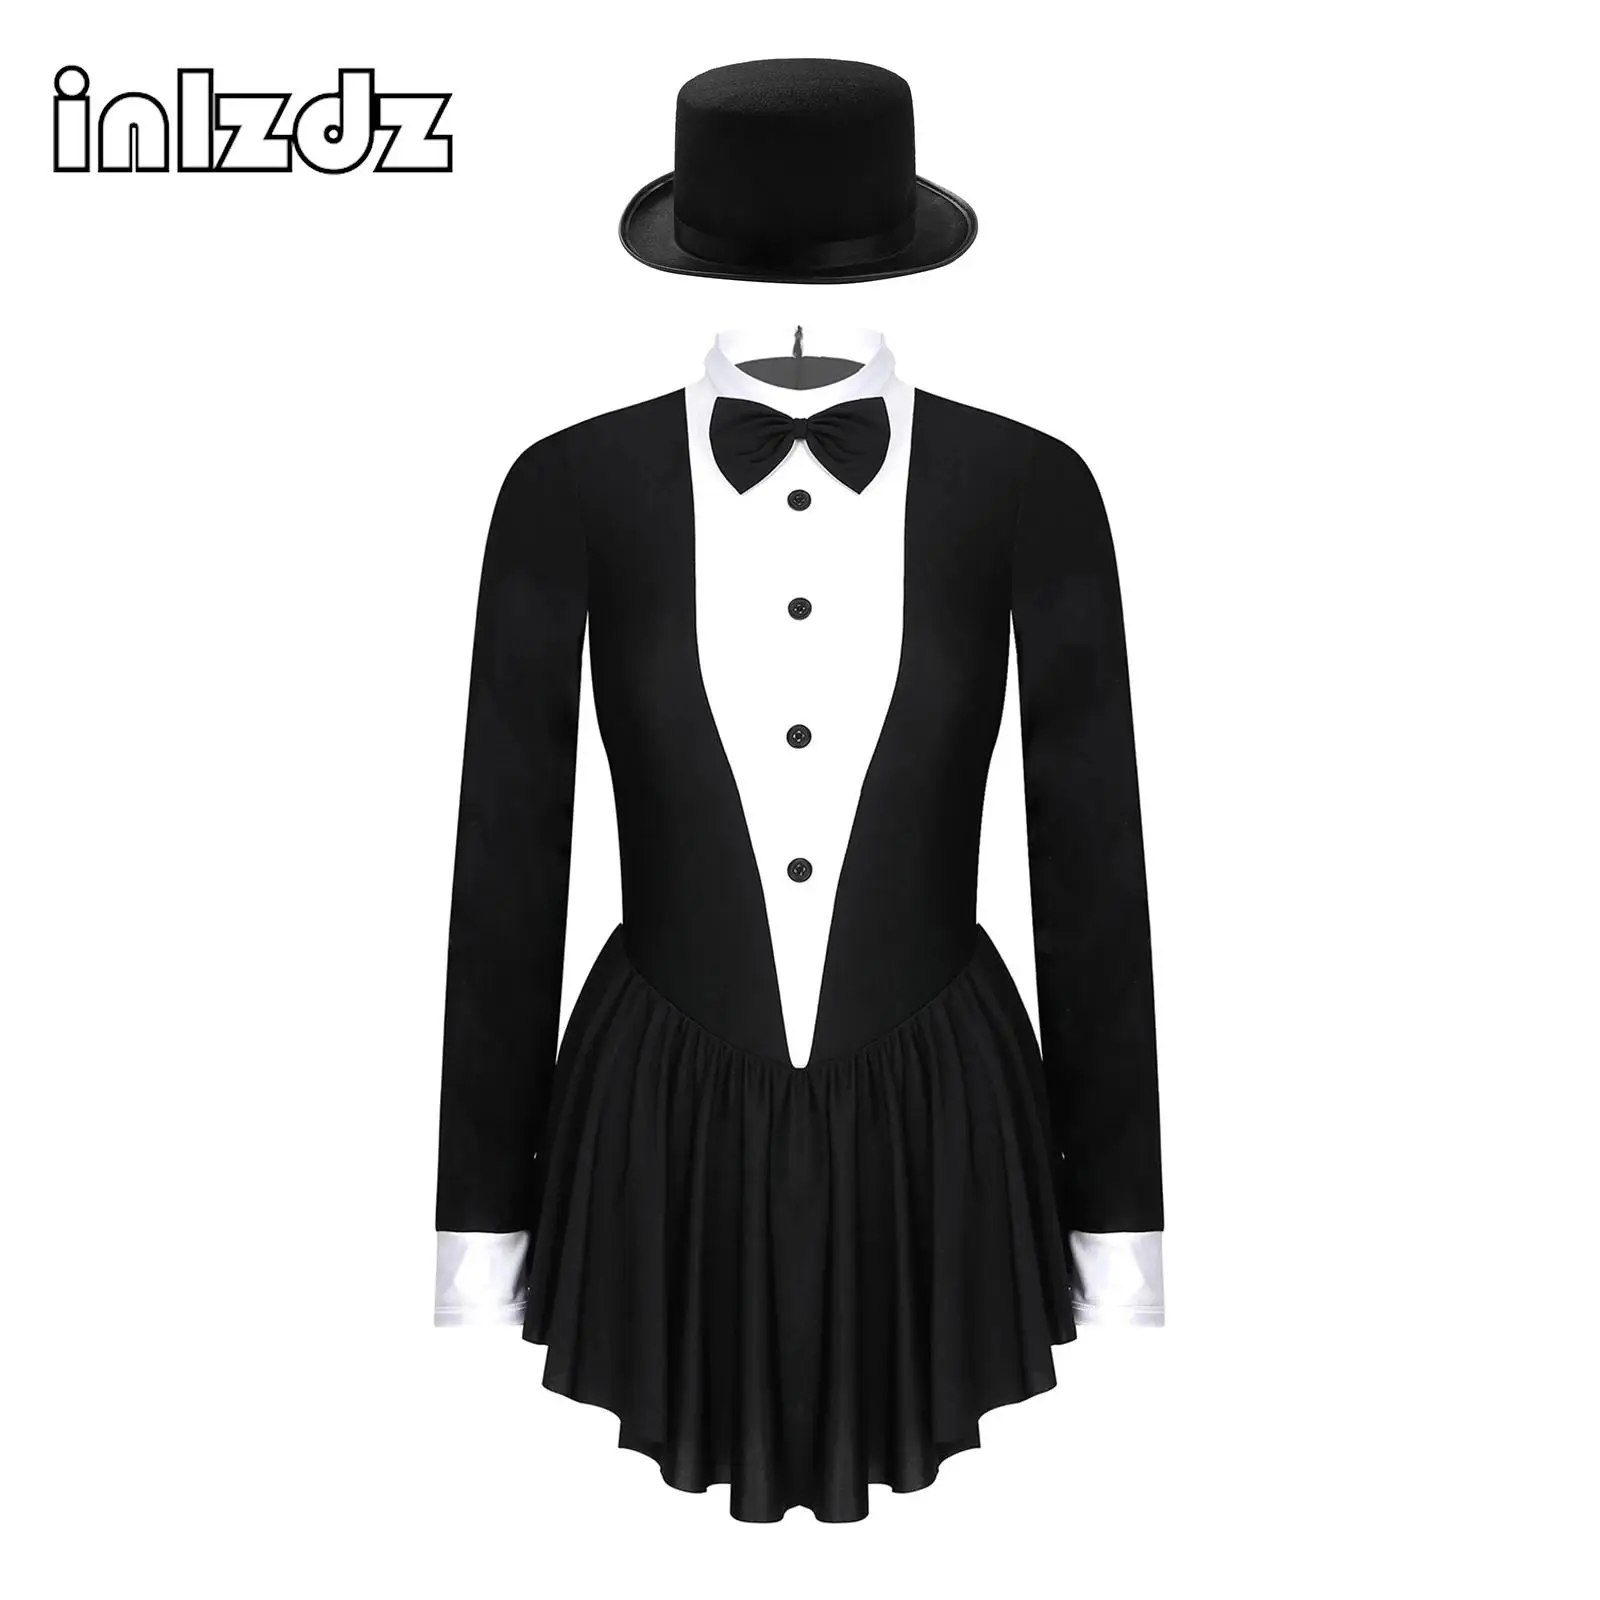 

Womens Contrast Color Tuxedo Bowknot Button Long Sleeve Ruffle Dress Dancewear with Hat for Role Play Theme Party Masquerade